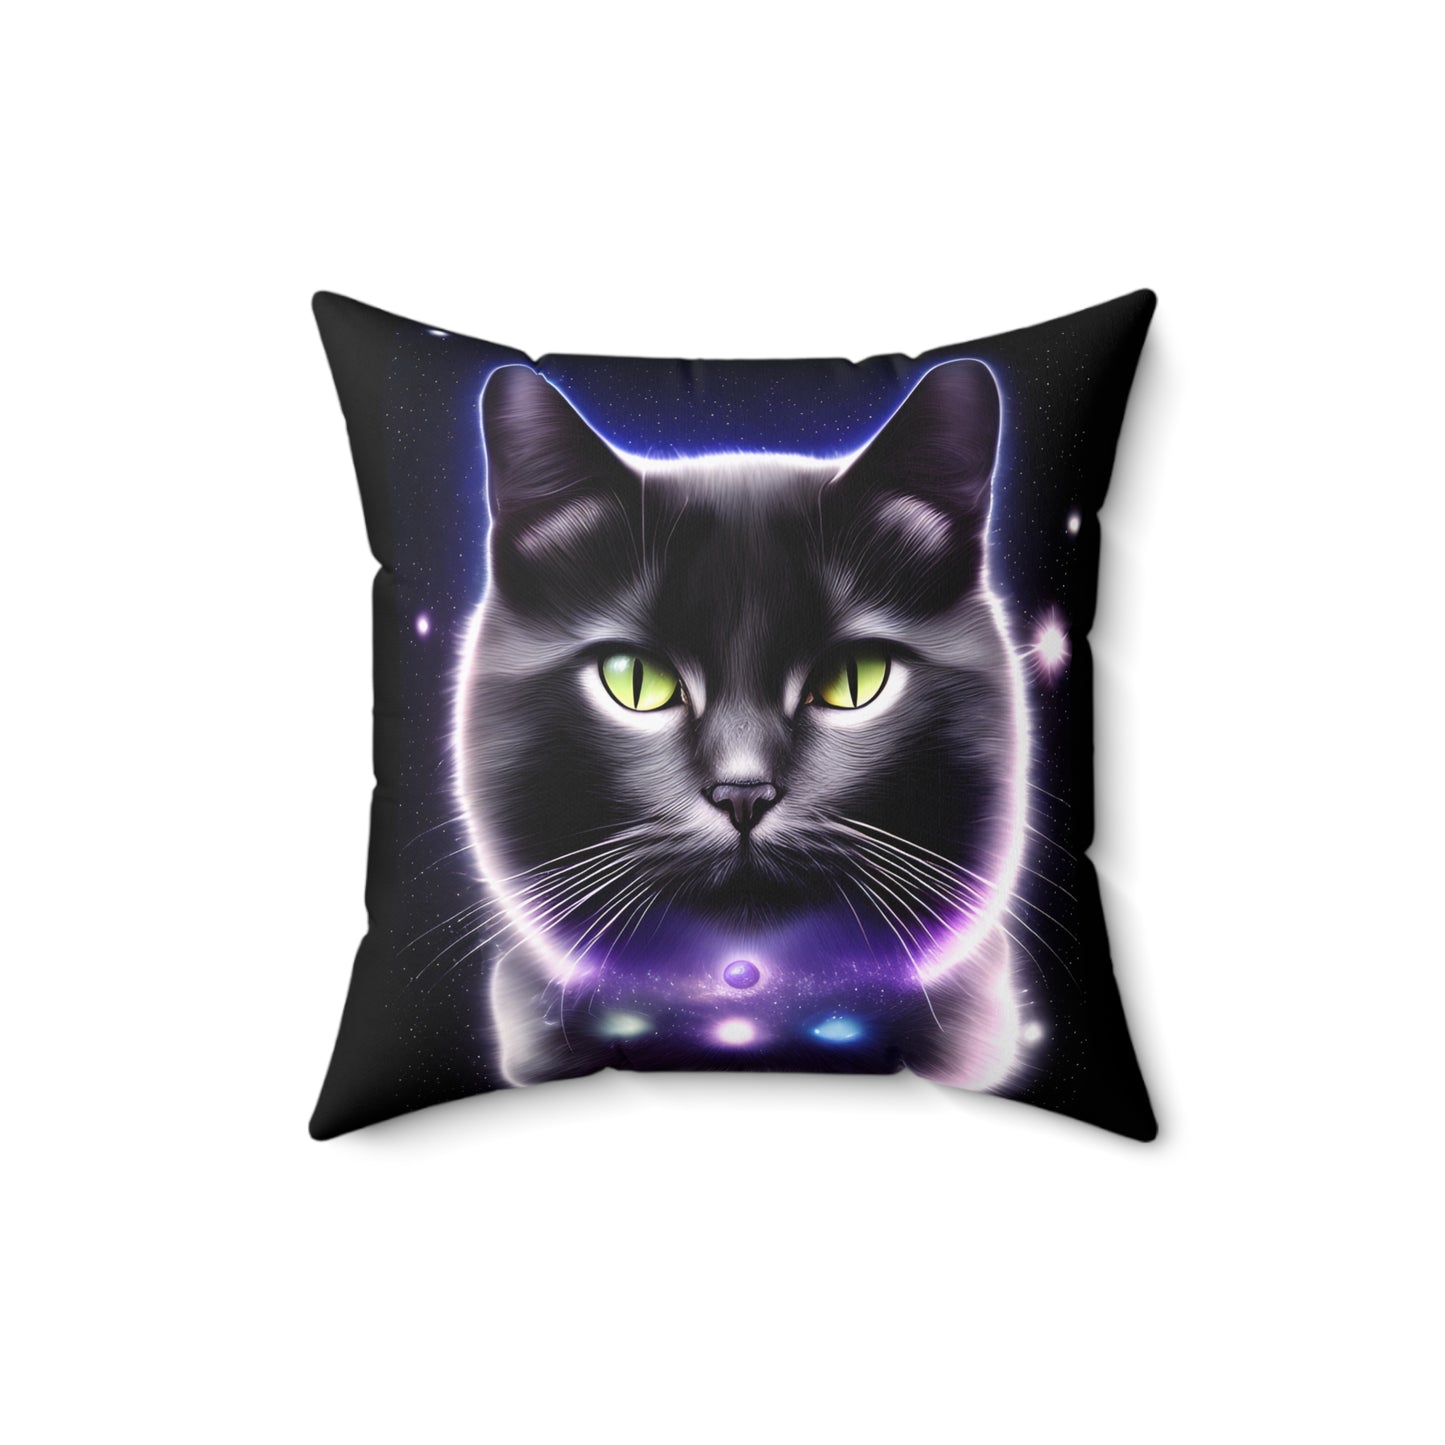 Couch Pillows - Celestial Cat Spun Polyester Square Pillow, Beautiful Indoor Pillows comes in Varying Sizes, Concealed Zipper